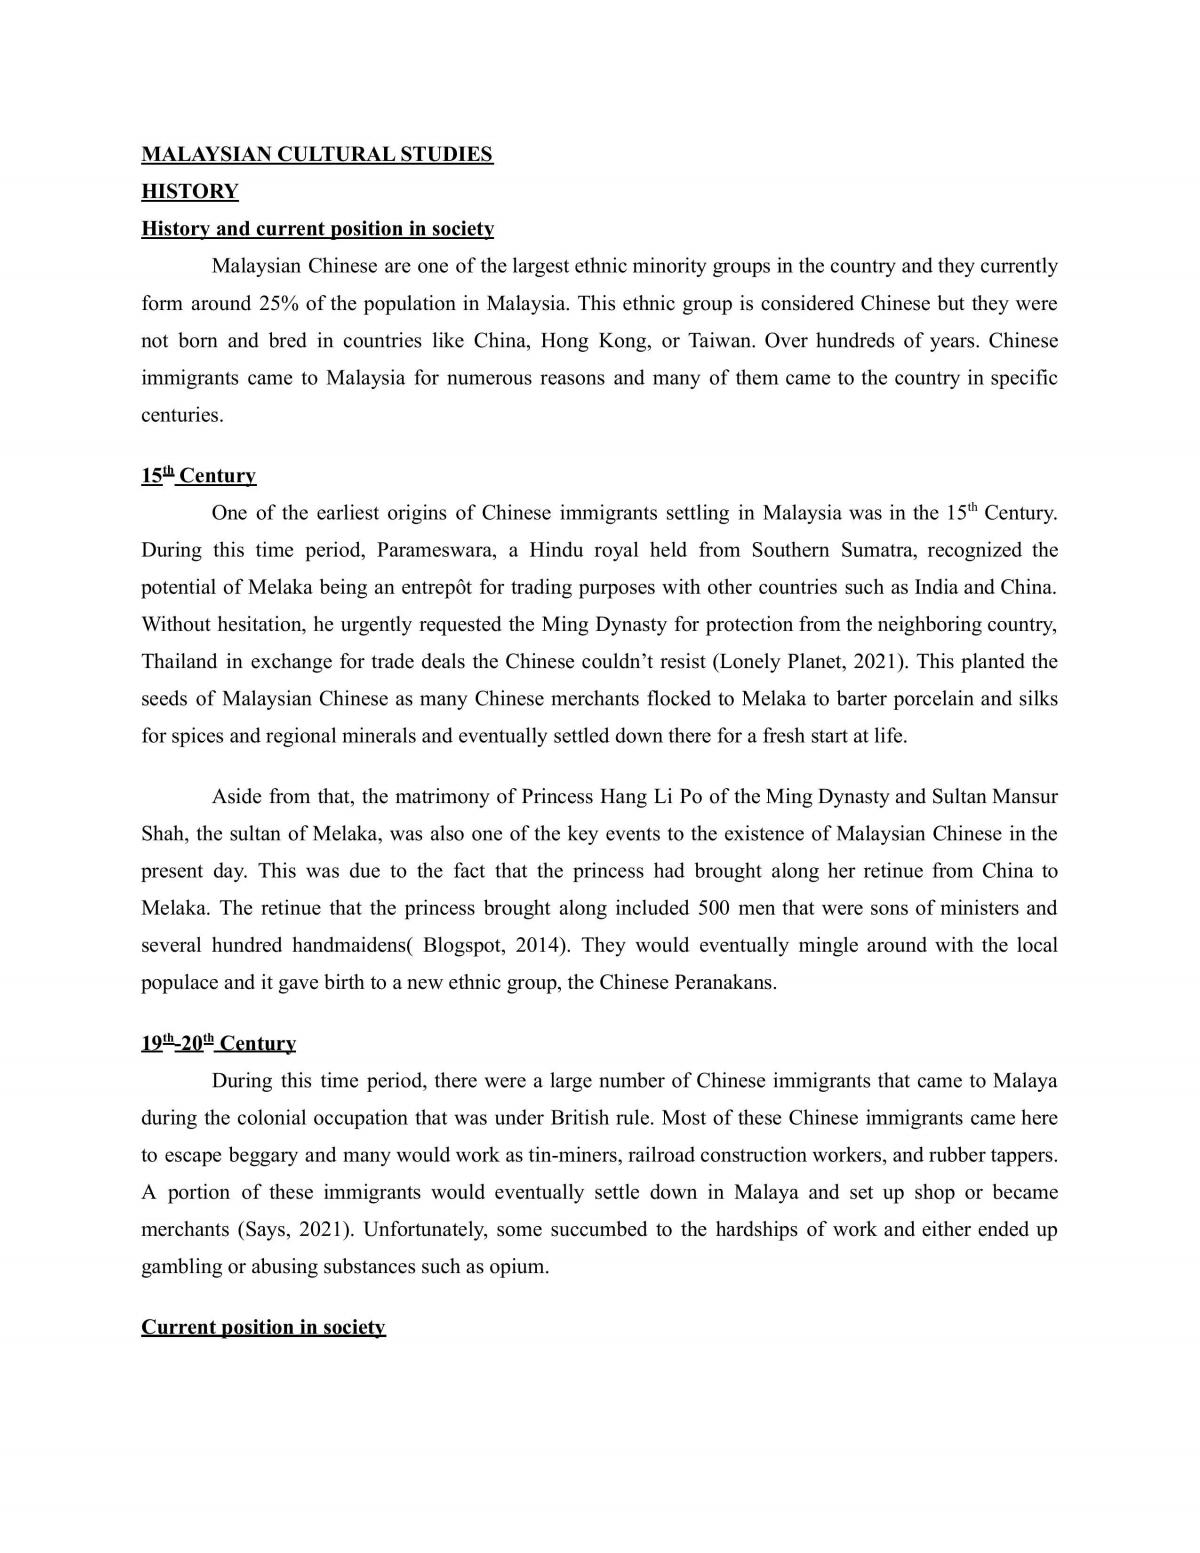 FPMC1014 Malaysian Cultural Studies Assignment - Page 1